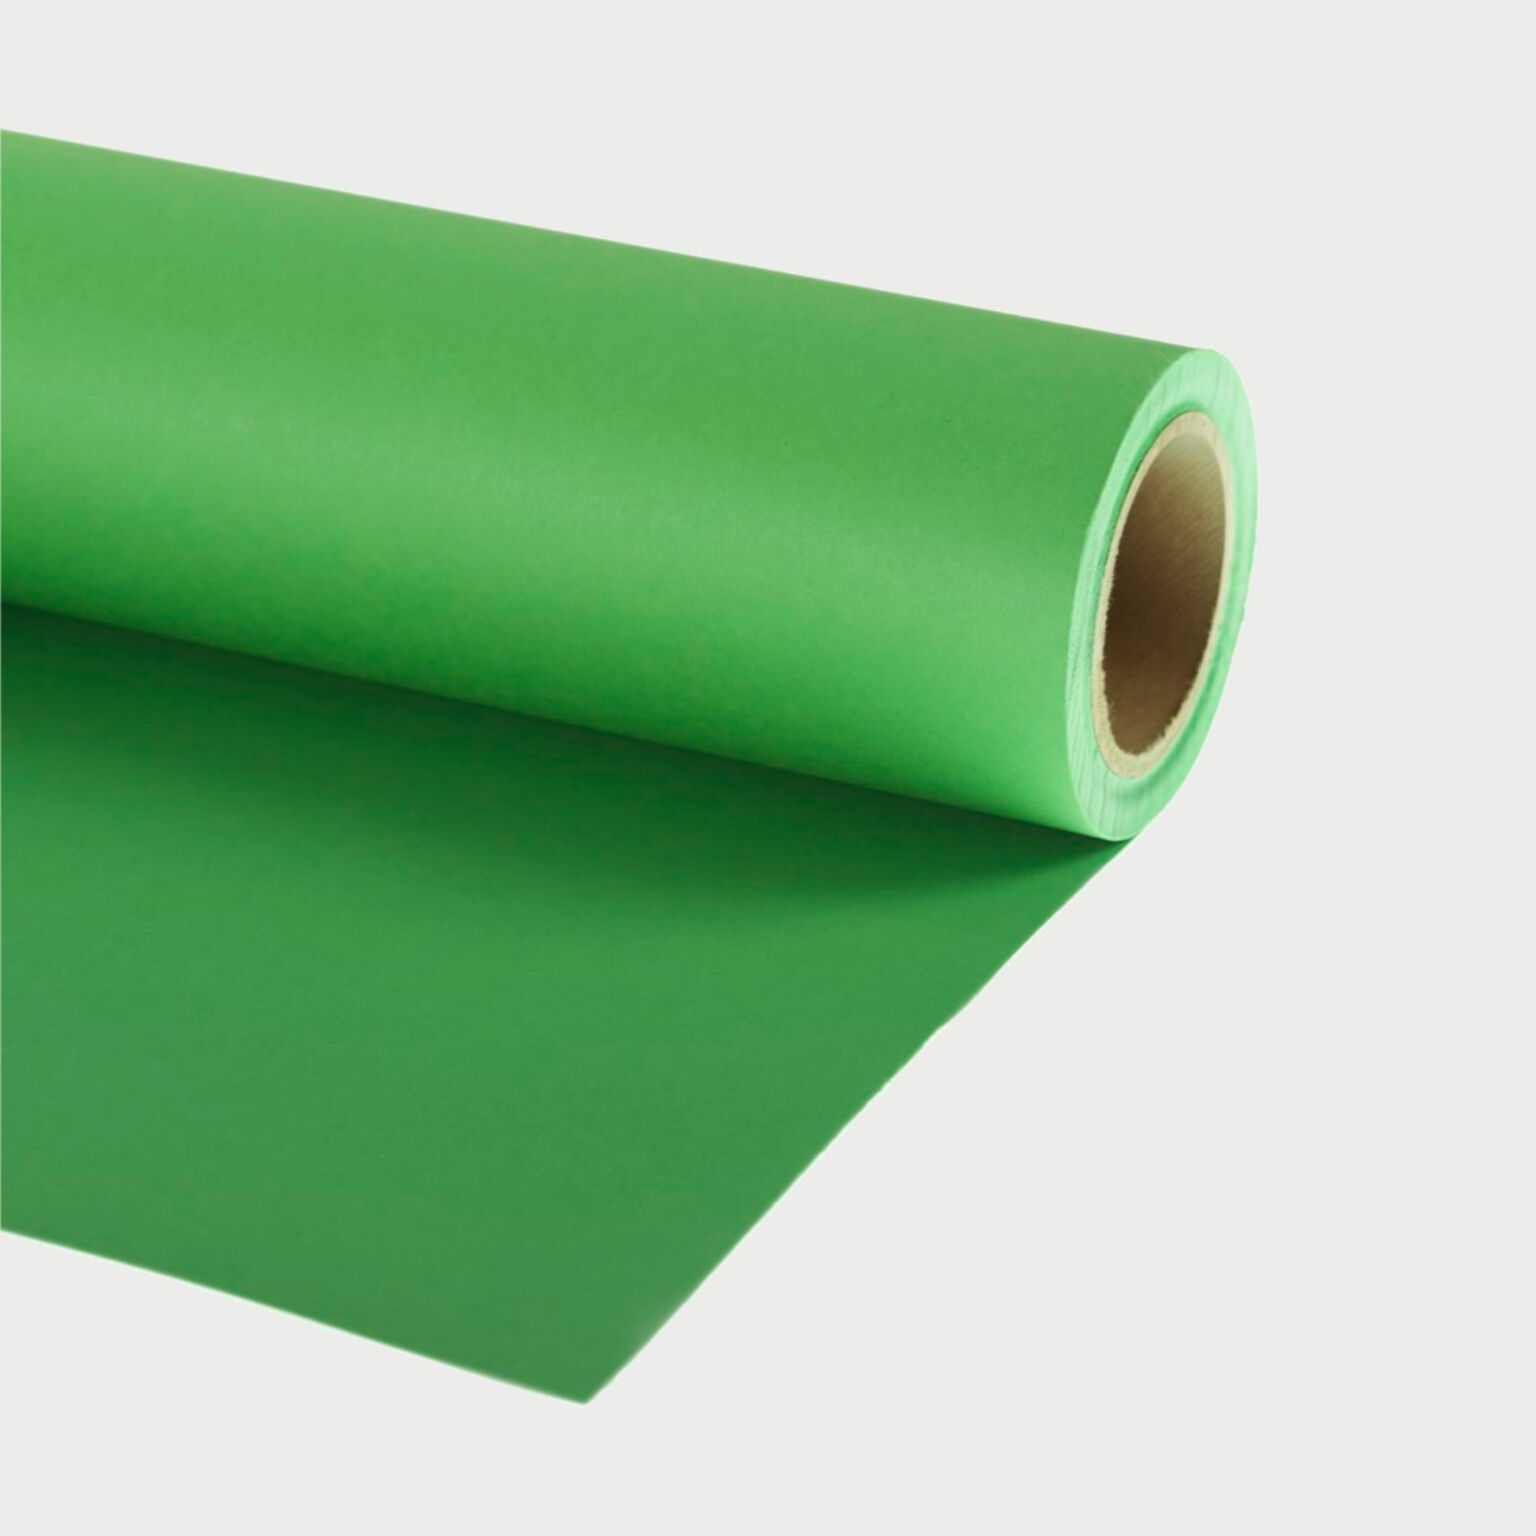 Manfrotto Paper Chromakey Green Seamless Background Paper 2 72m X 11m